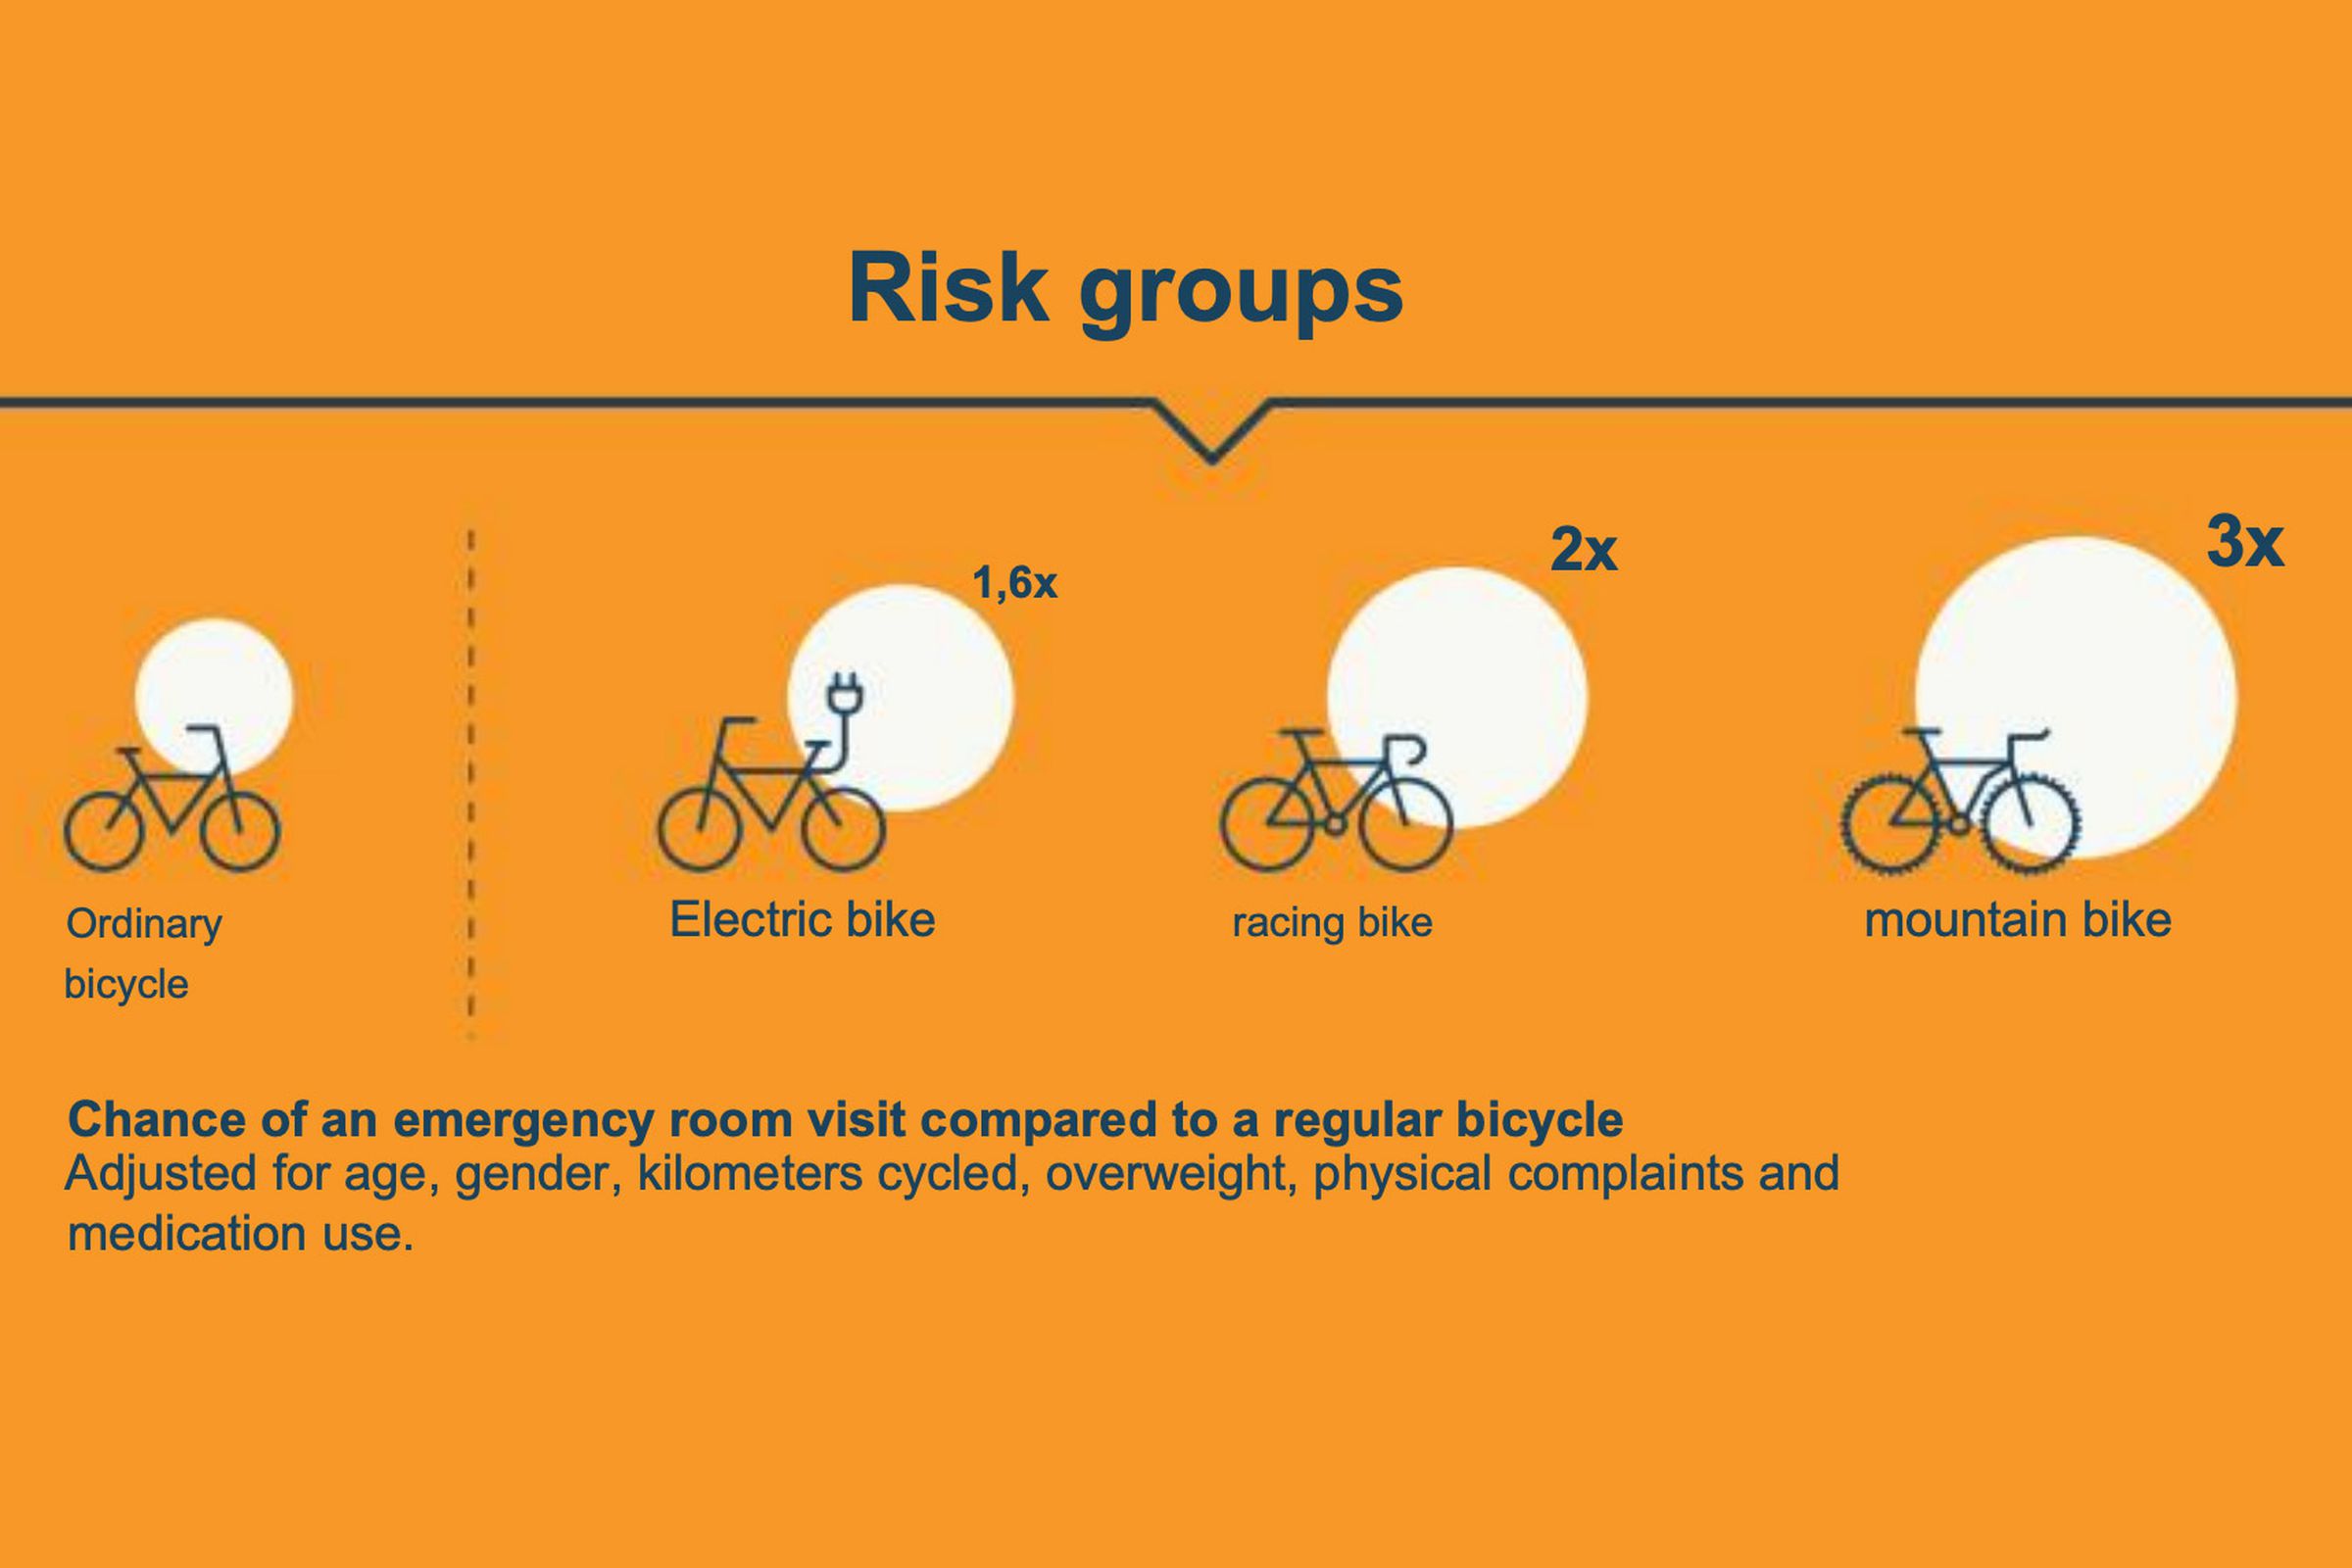 You’re 1.6 times more likely to end up in the emergency room on an e-bike, compared to a regular bike, says report (translated by The Verge).